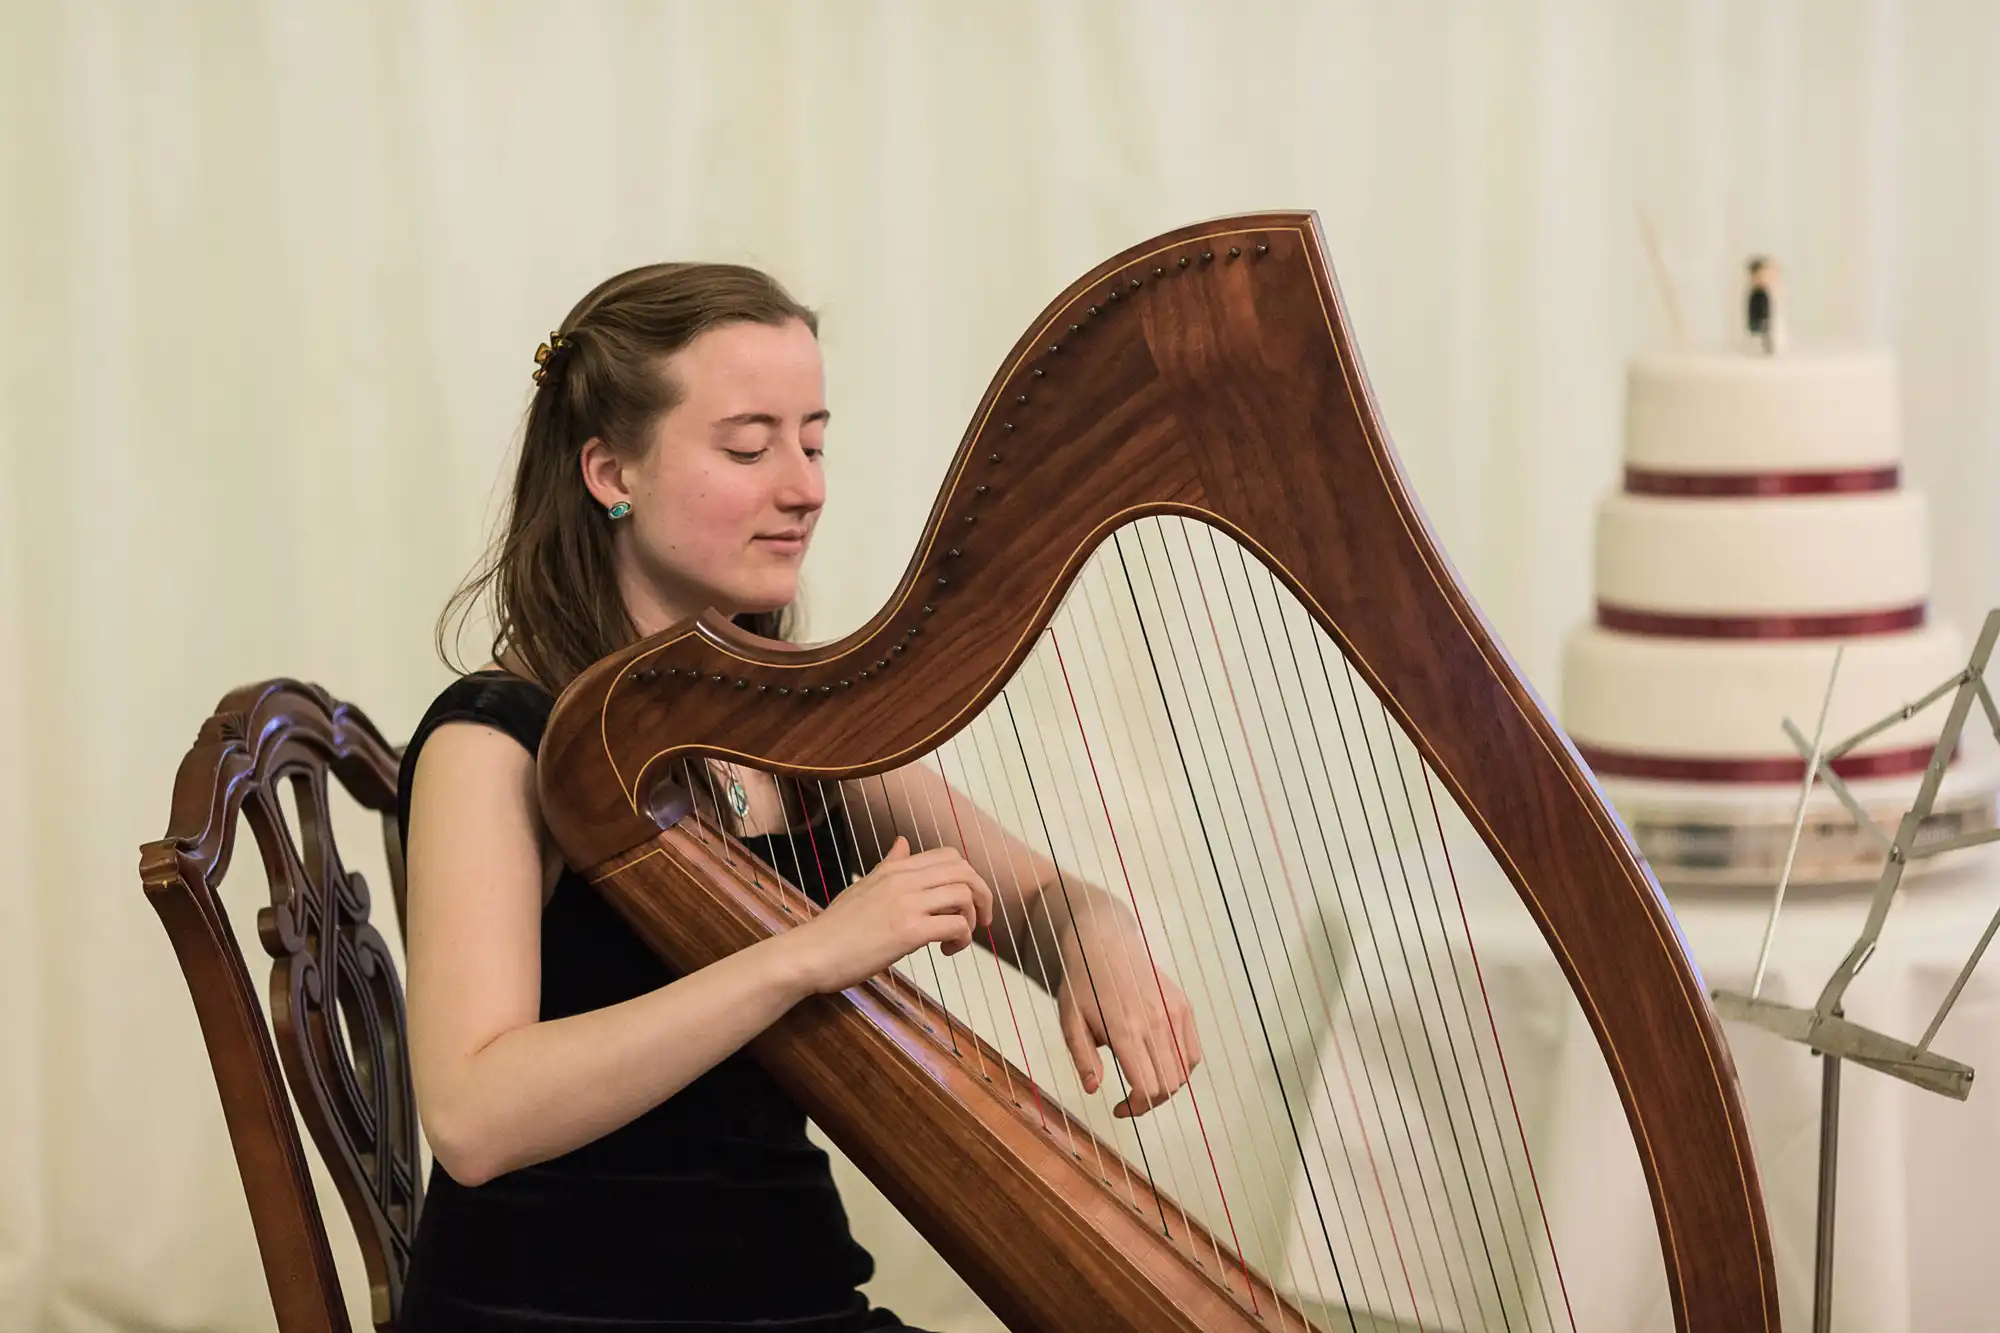 A woman plays a harp with concentration at a formal event, a tiered cake visible in the background.